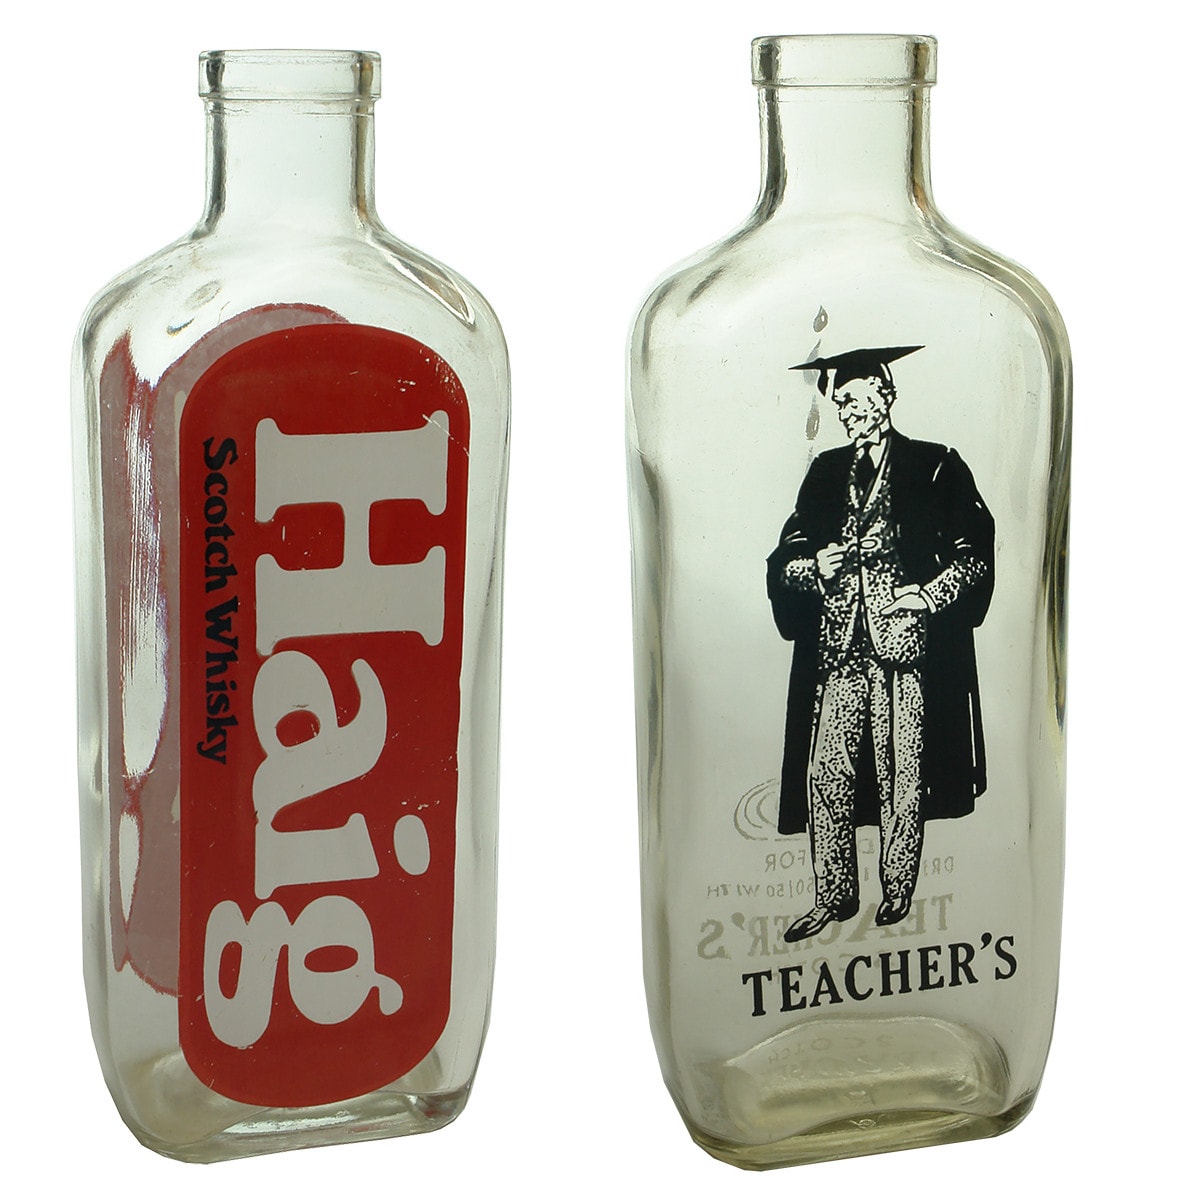 Pair of Ceramic Label Bottles with Whisky Advertising: Haig Scotch Whisky and Teacher's Scotch.